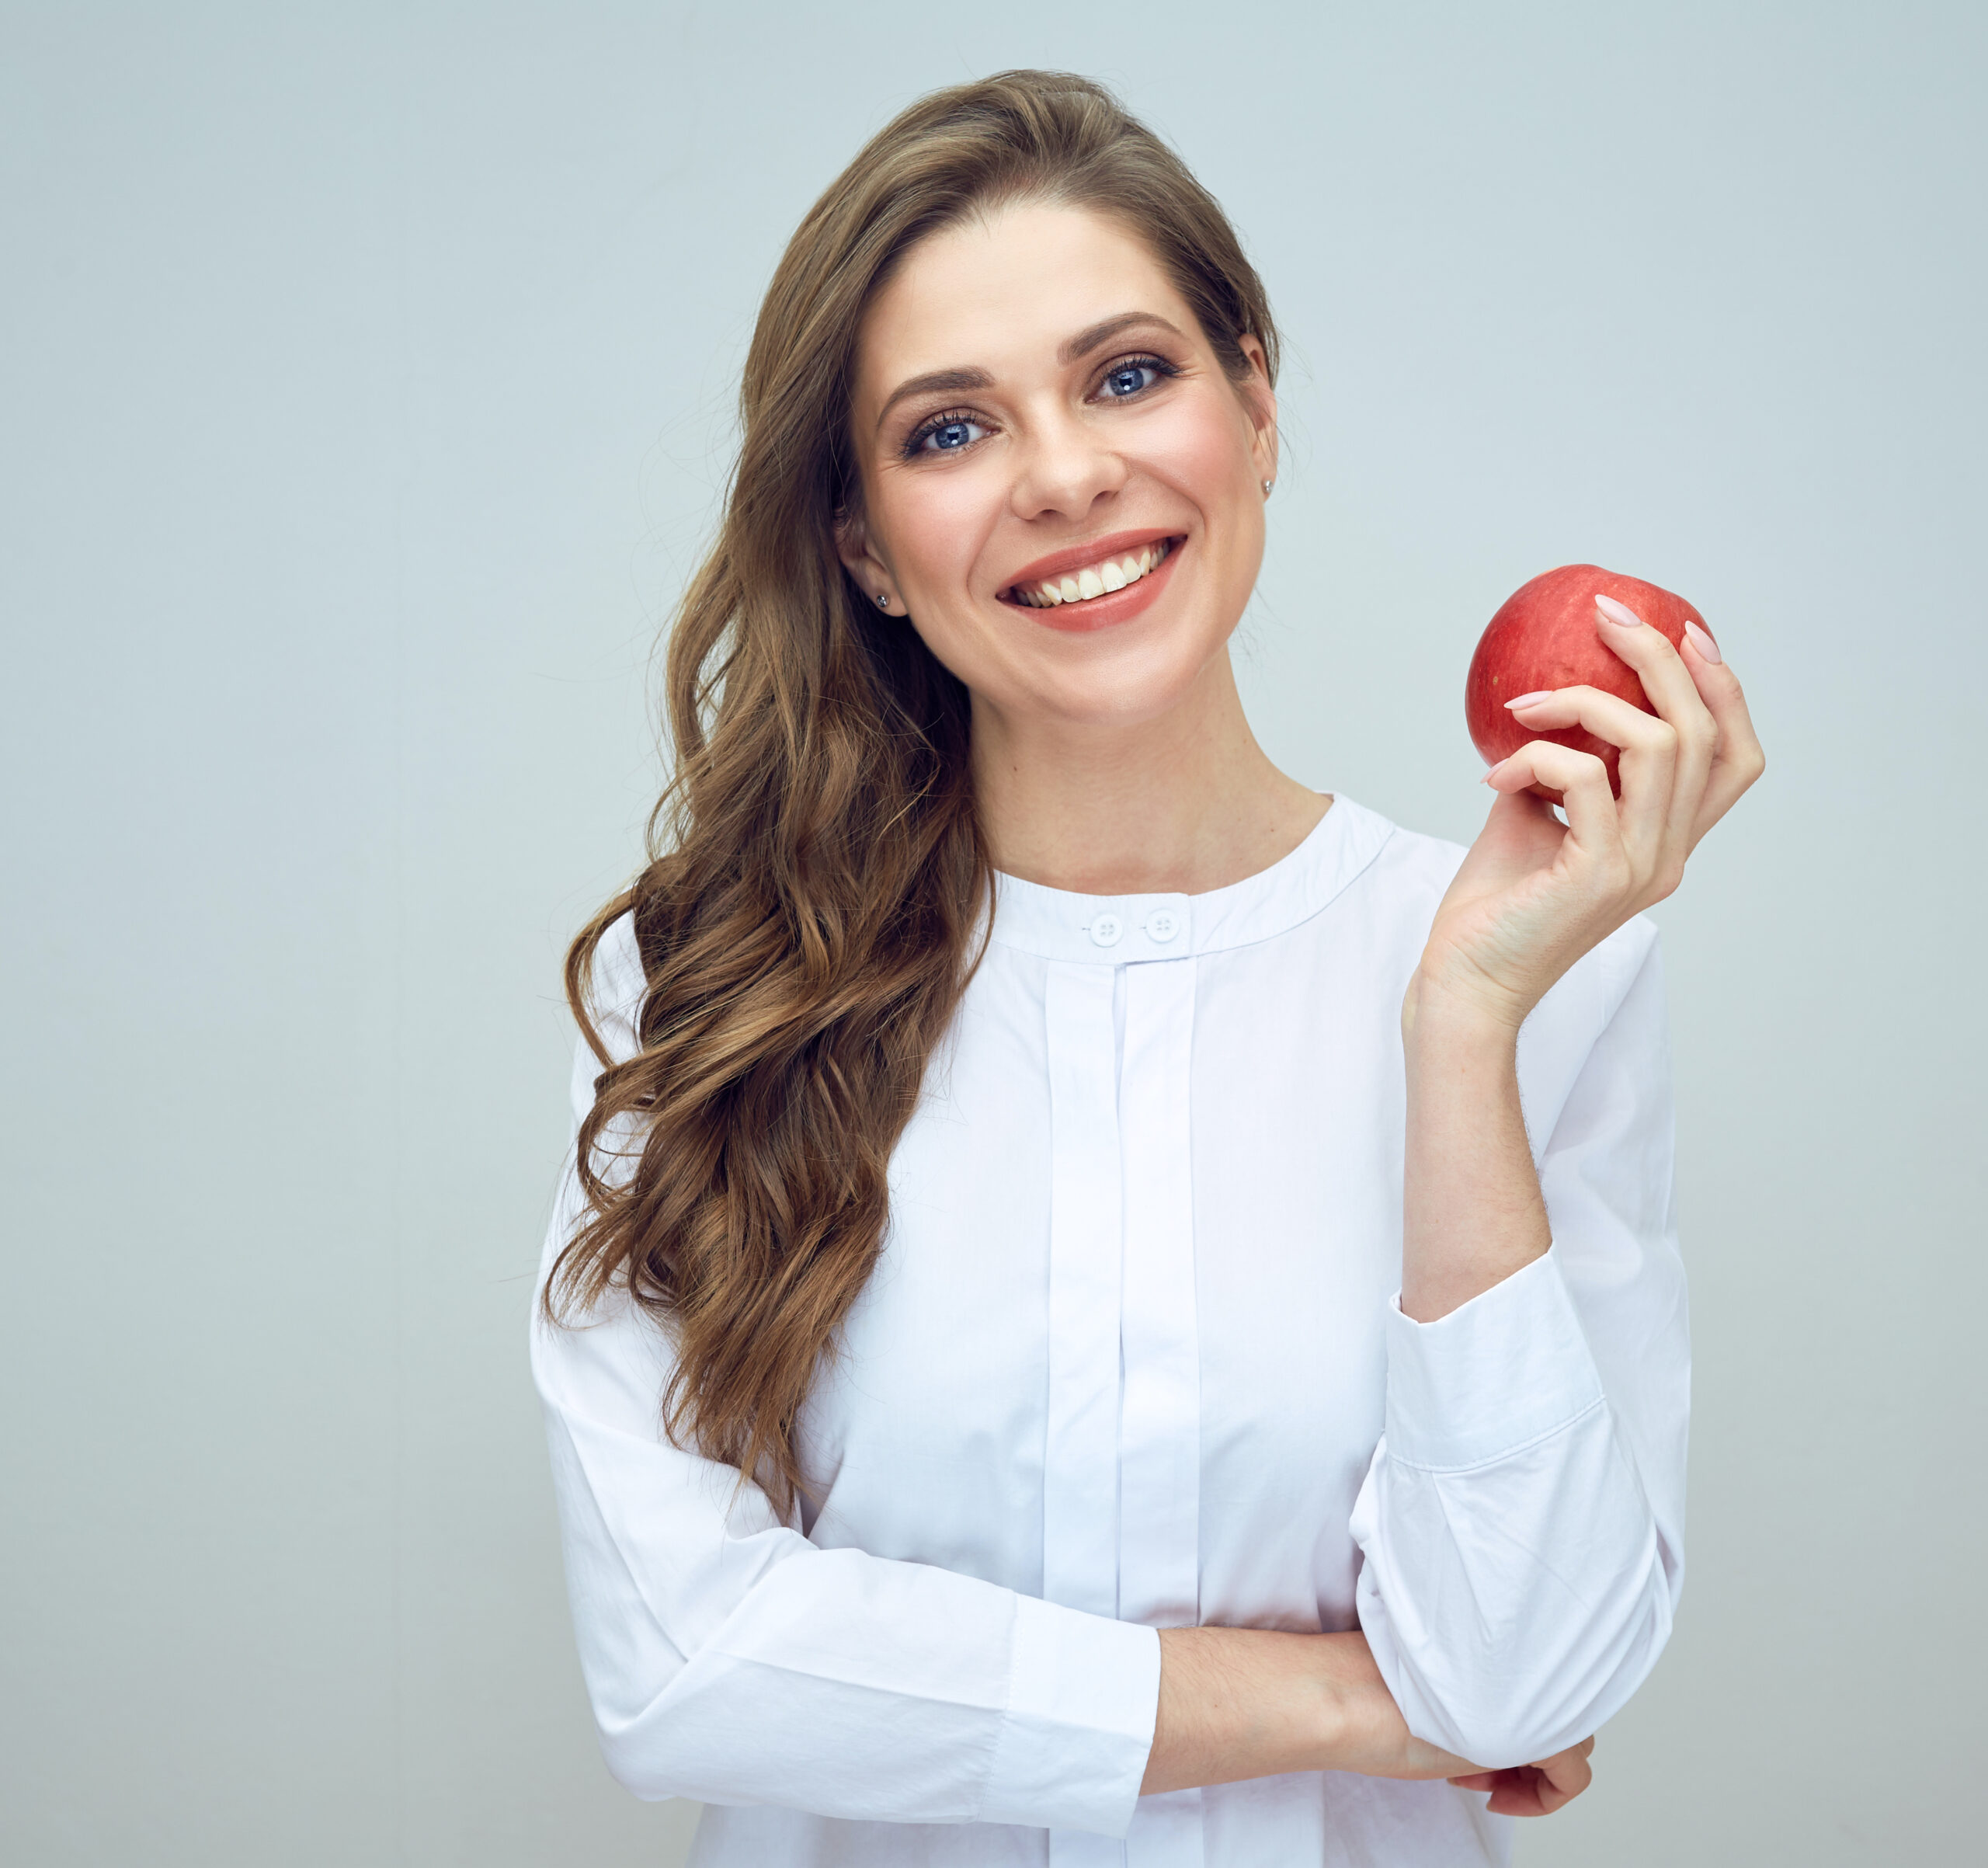 woman with toothy smile wearing white shirt holding red apple. isolated studio portrait.
diet and teeth